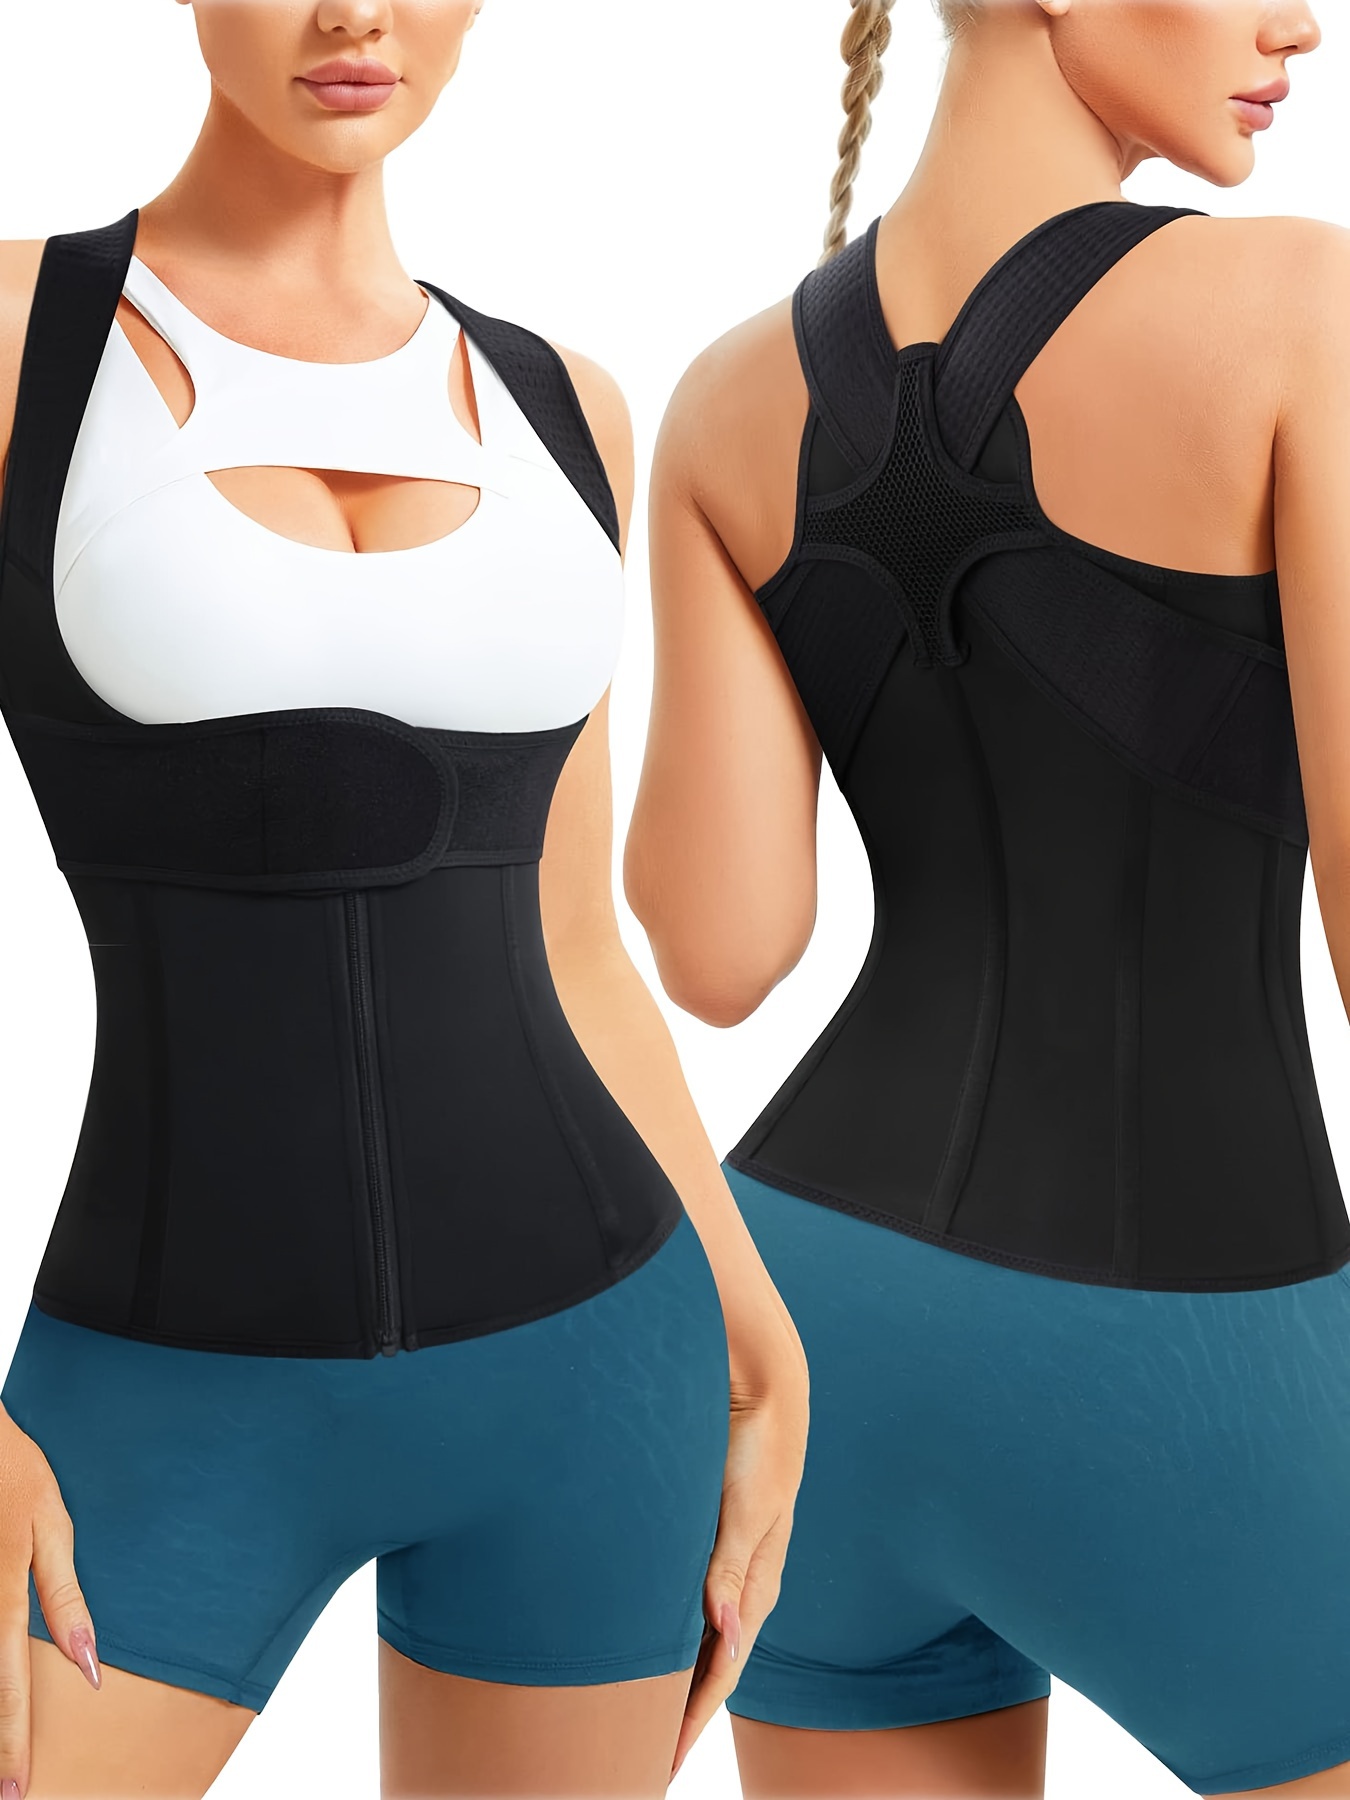 Padded Shaperwear Compression Camisole Body Shaper Woman Tummy Control Tank  Tops Slimming Shapers Waist Trainer Corset Slim Vest - Price history &  Review, AliExpress Seller - miss moly shapewear&corset Store